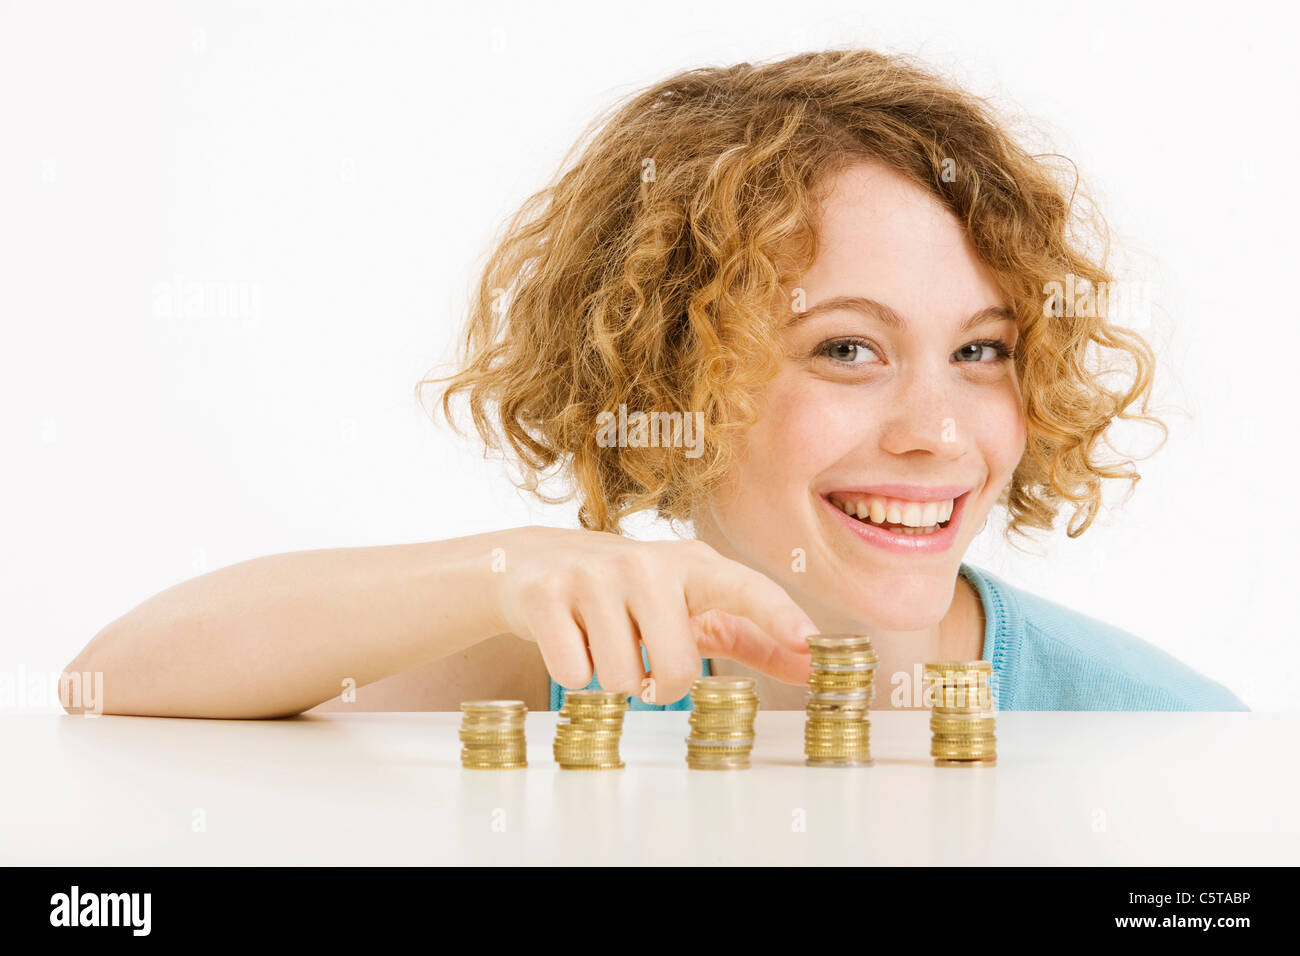 Young woman and stacked Euro coins, smiling, portrait Stock Photo